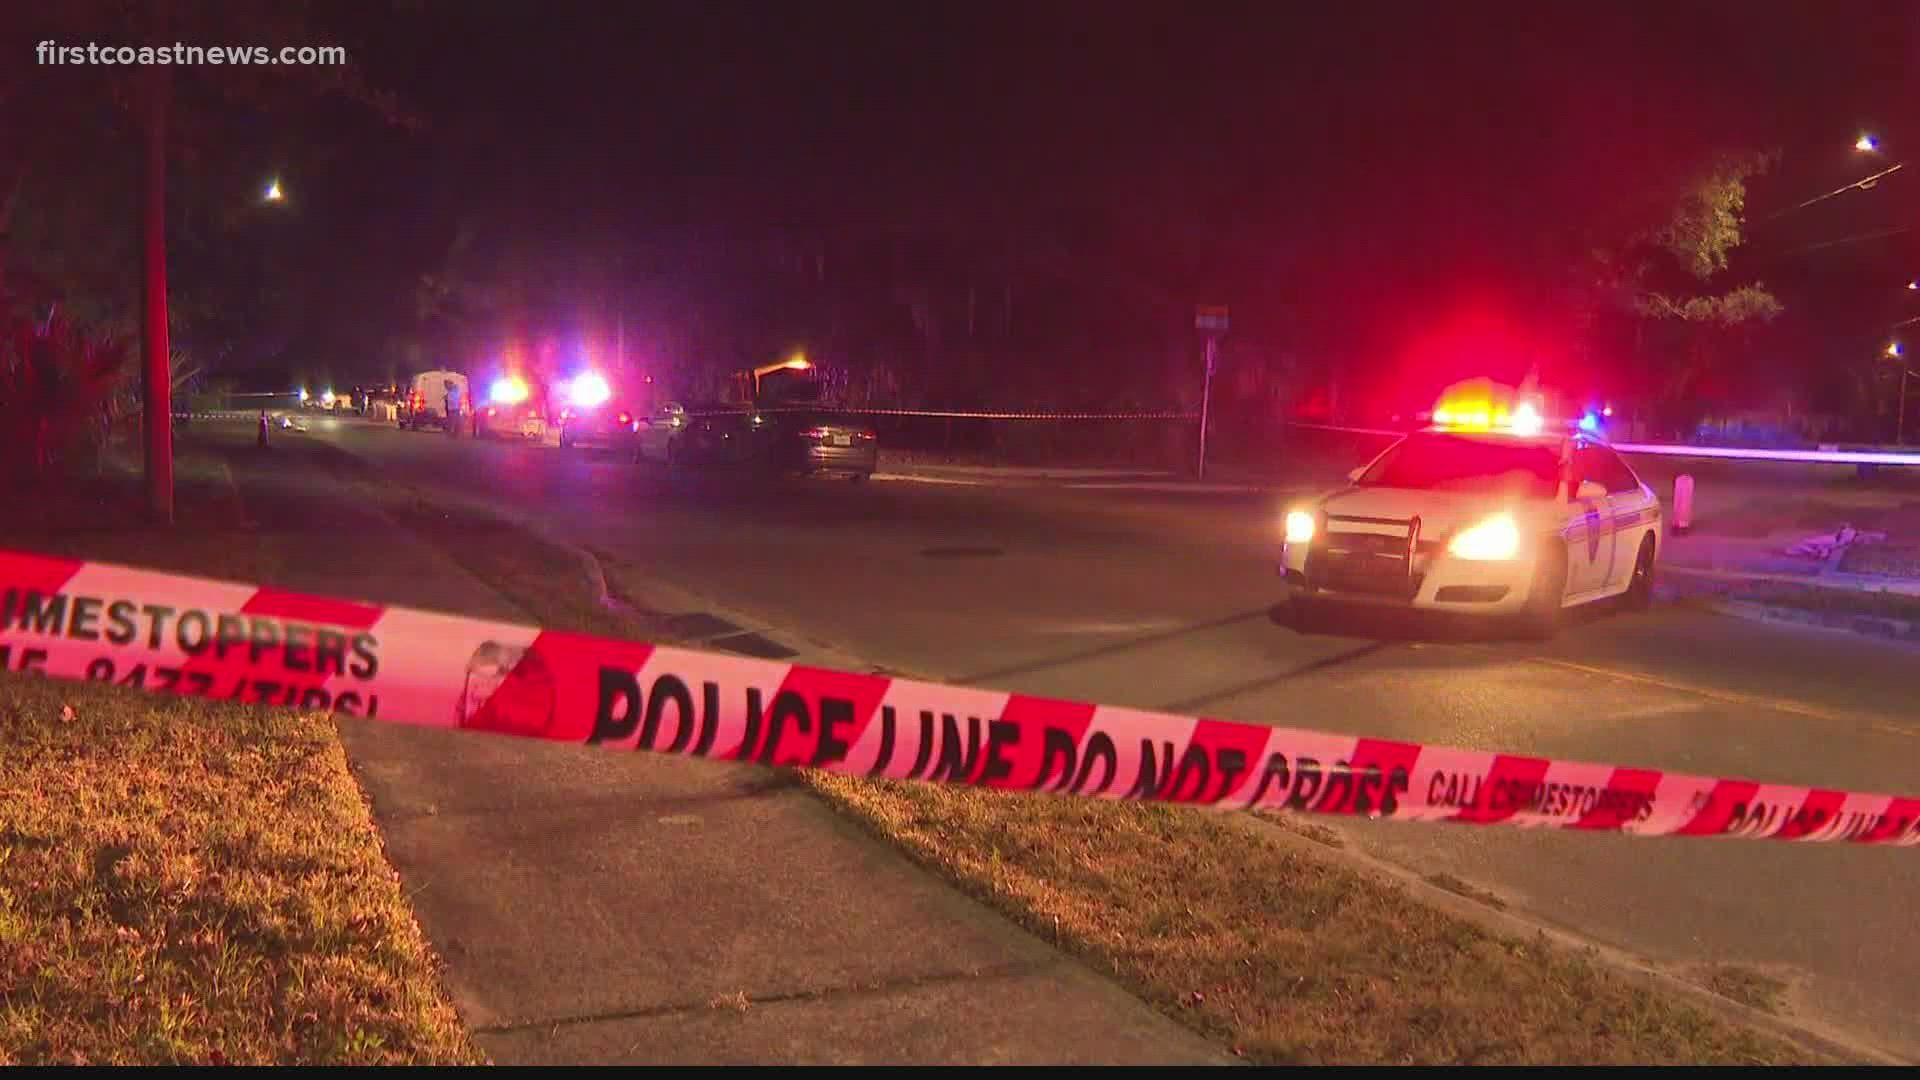 The male was taken to the hospital in critical condition, according to JSO. No officers were hurt during the incident.